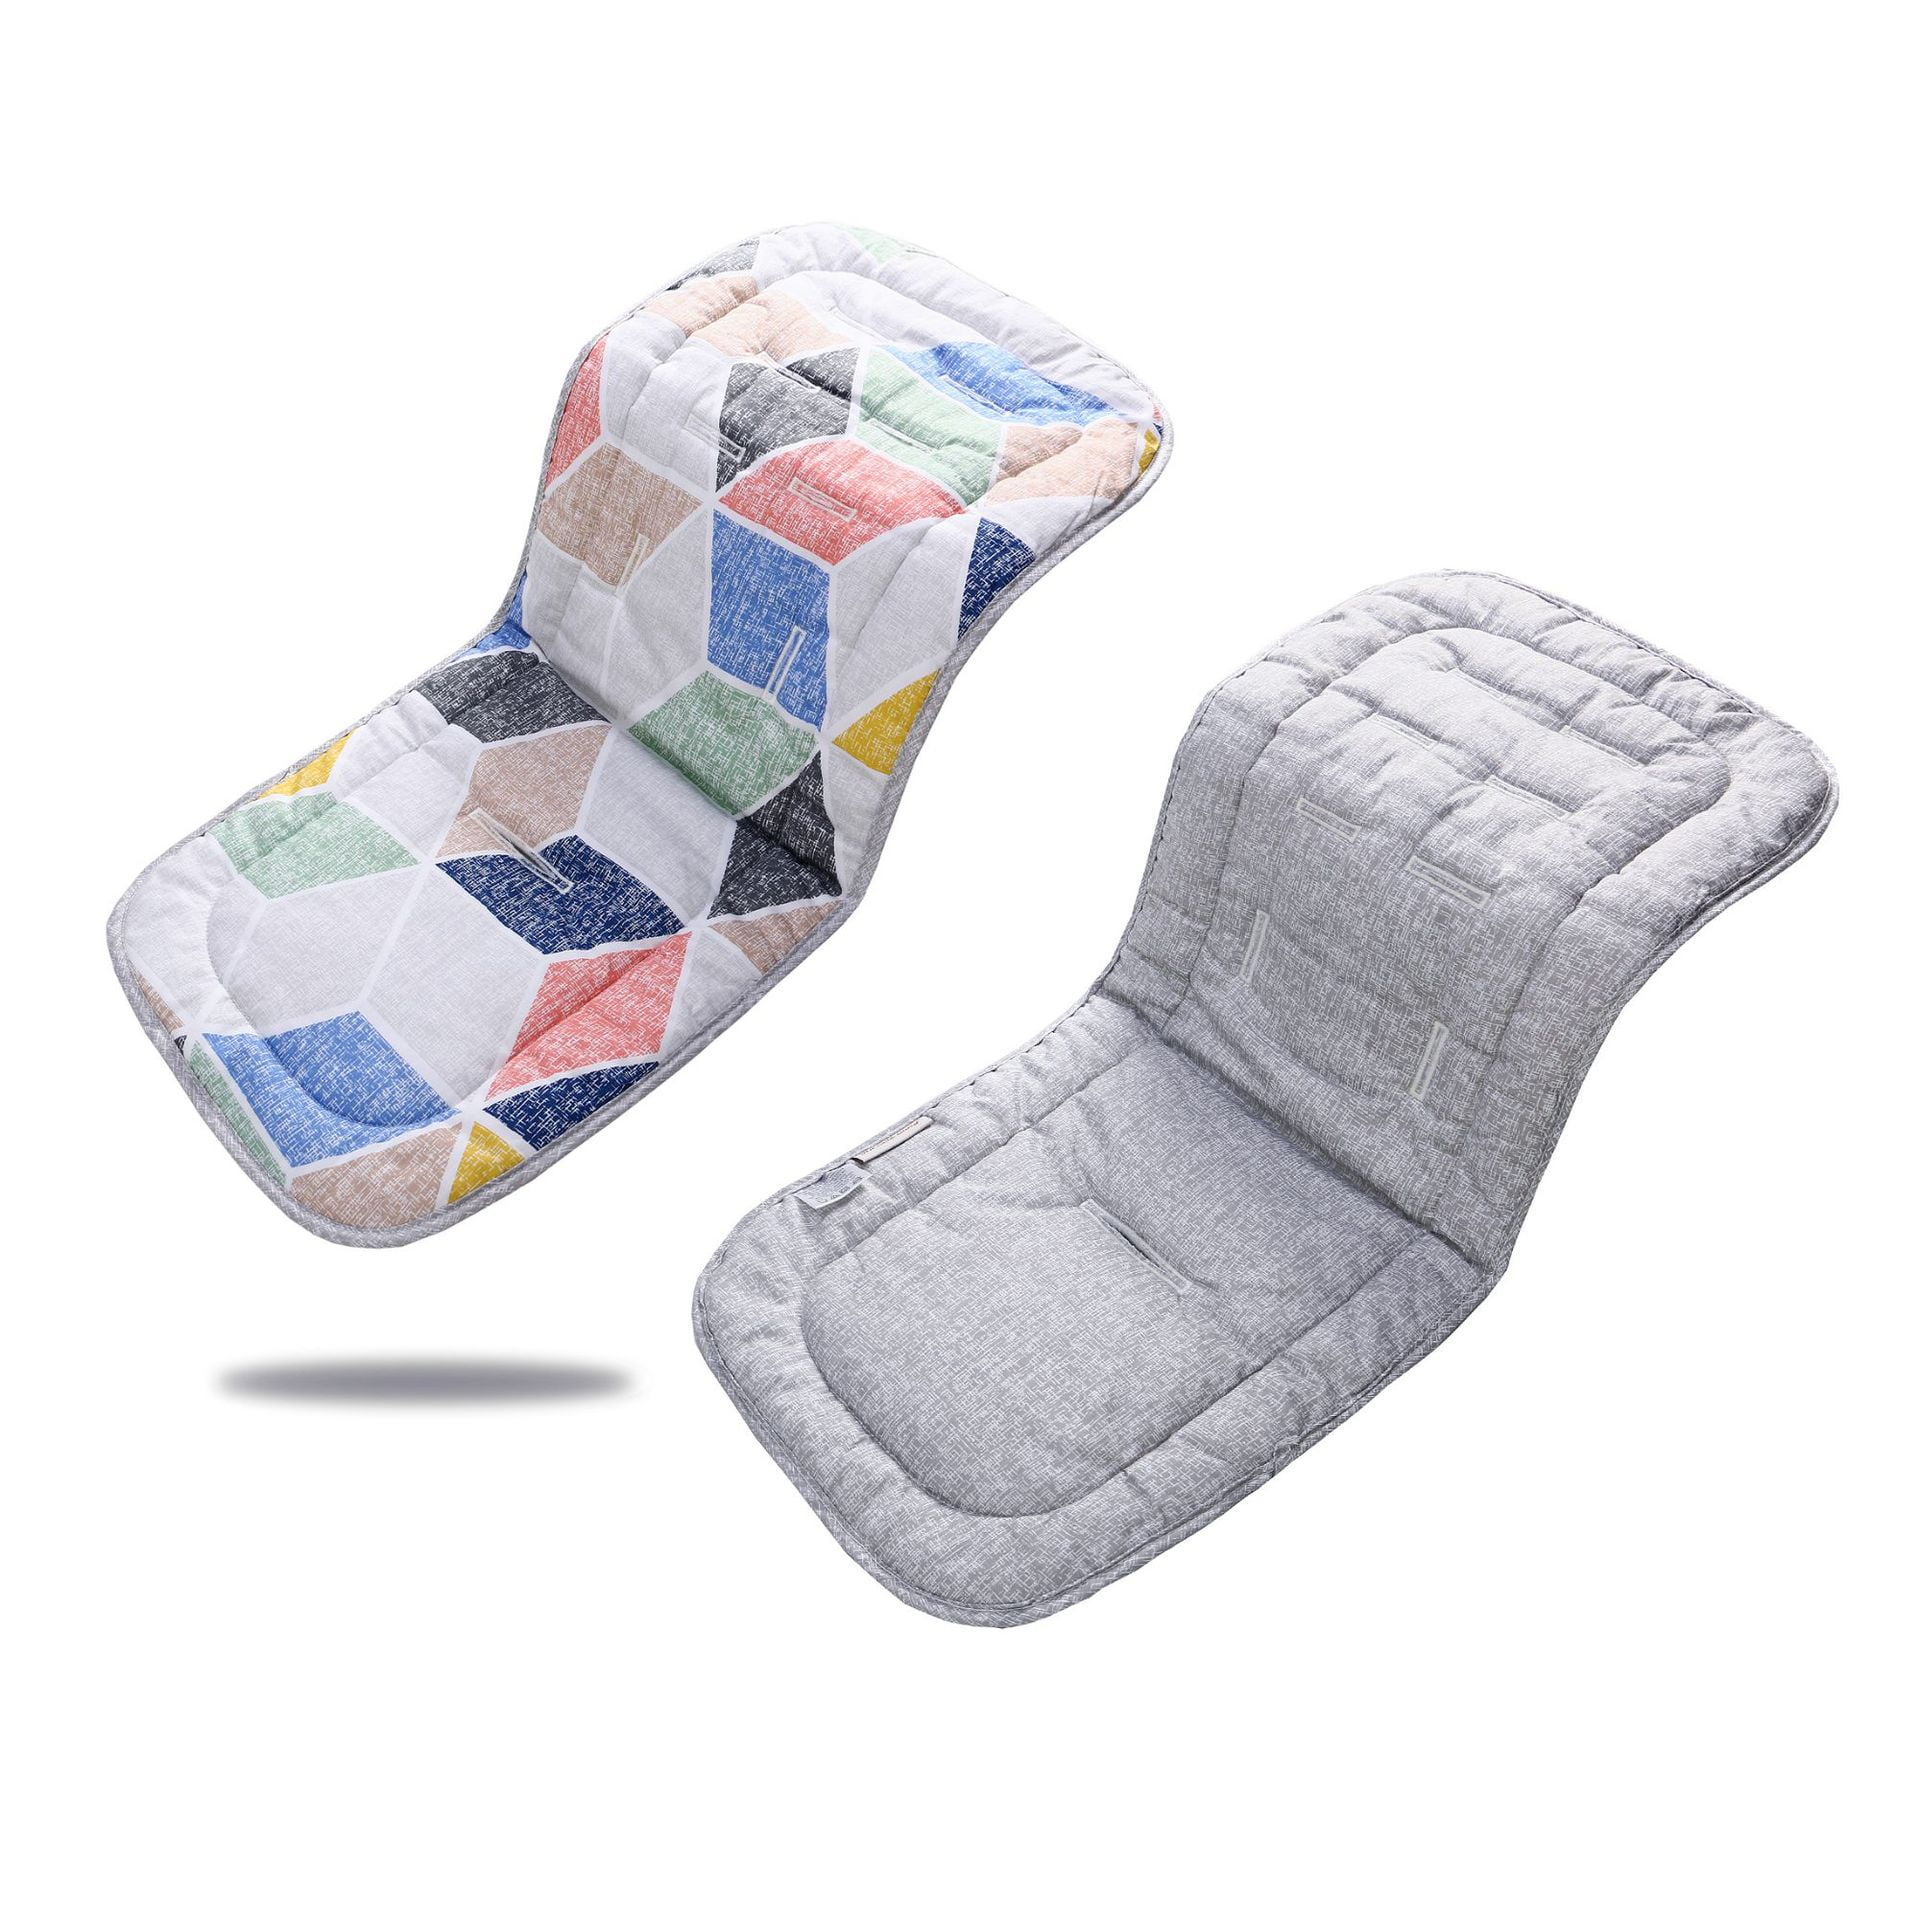 White 100% Cotton Padded Cushion Universal Baby Stroller Seat Liner Infant Car Seat Cushion 